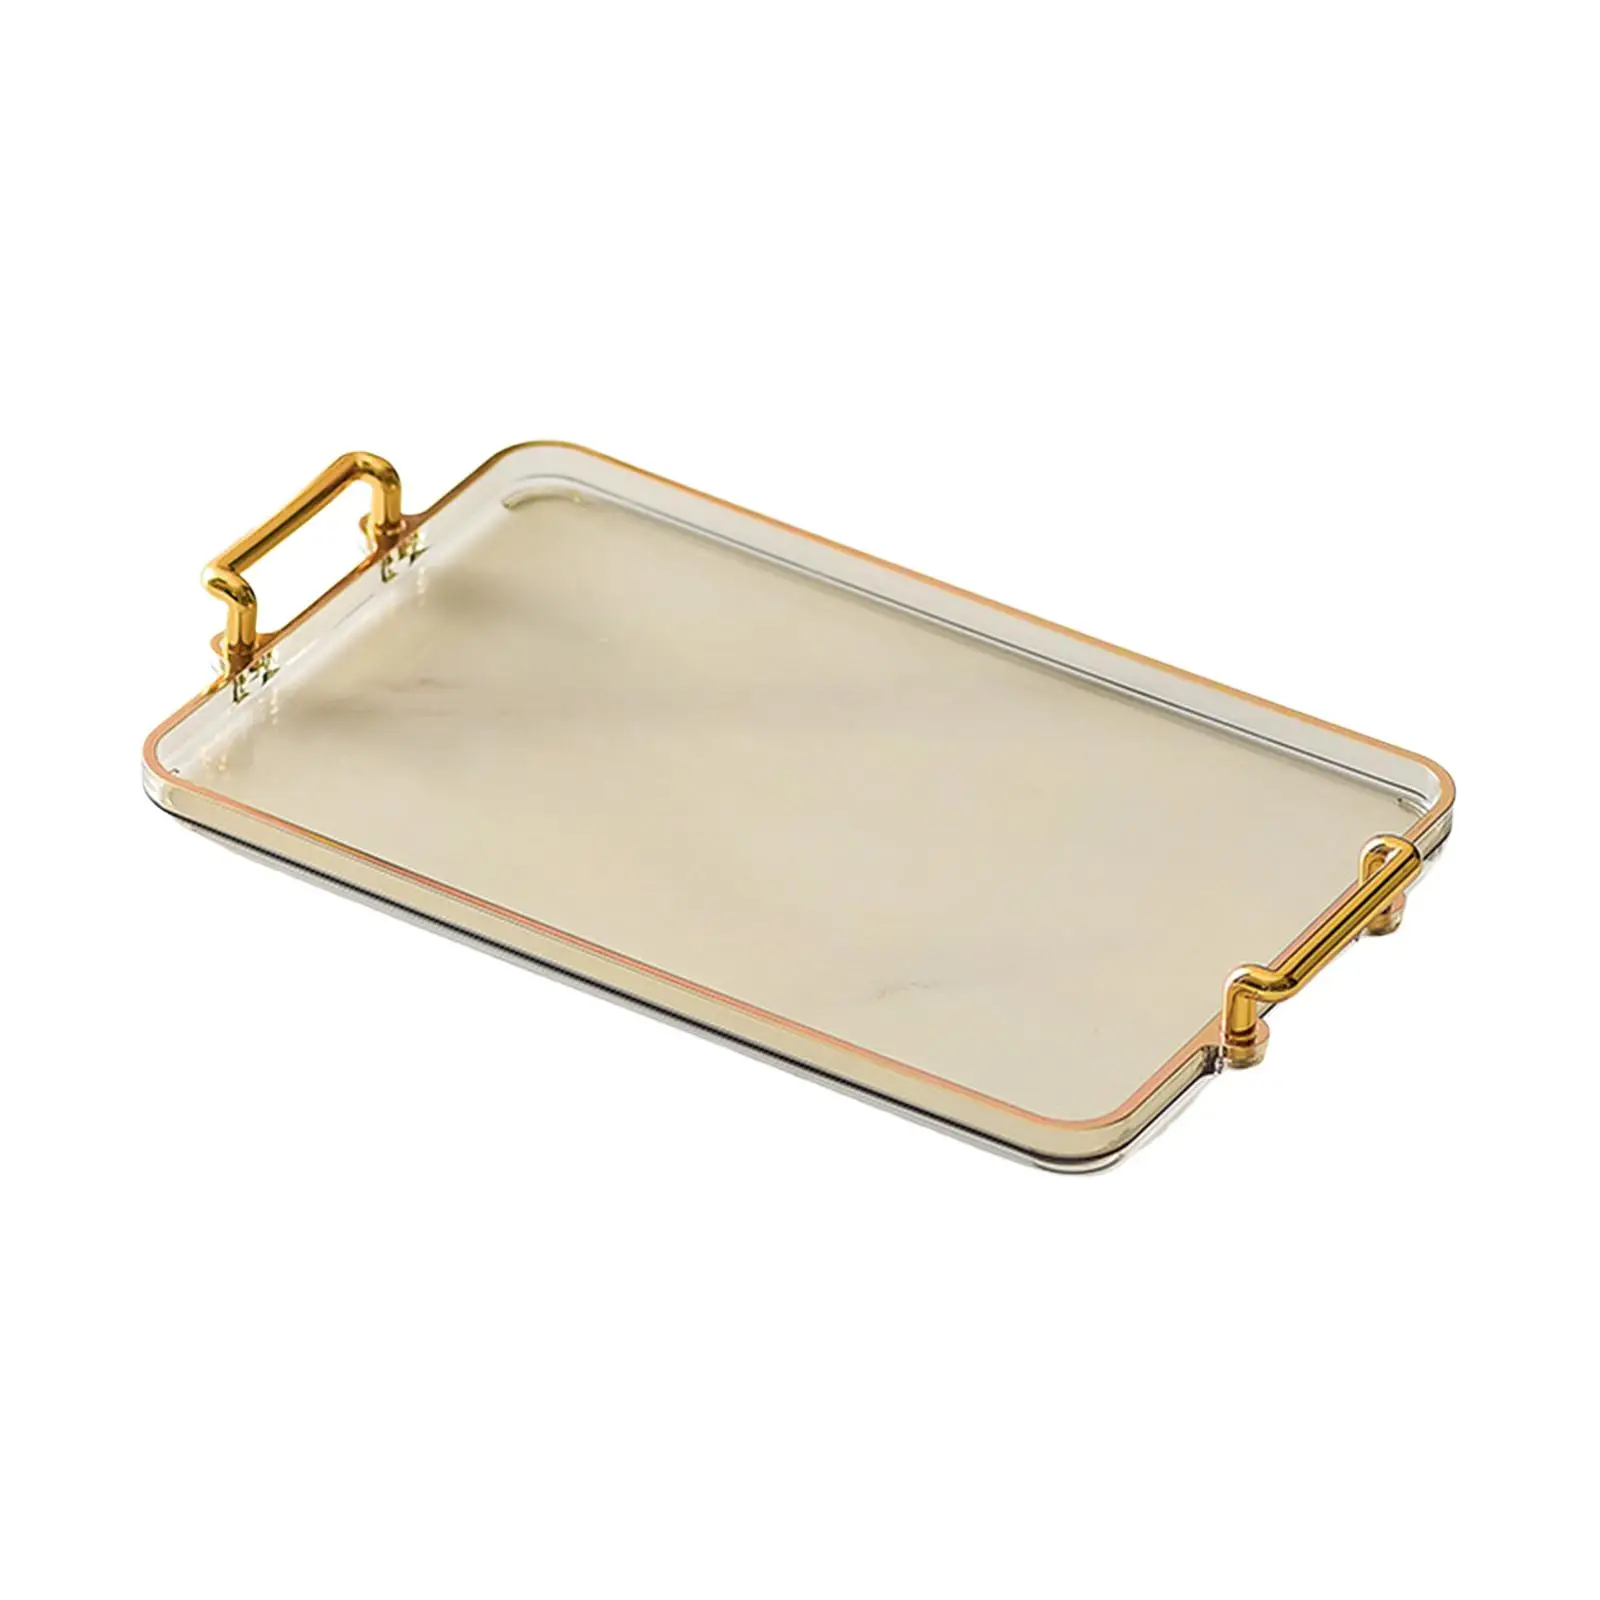 Farmhouse Serving Tray Shower Caddy Plate Jewelry Perfume Cosmetics Holders Multifunction with Handles for Bathroom Home Office